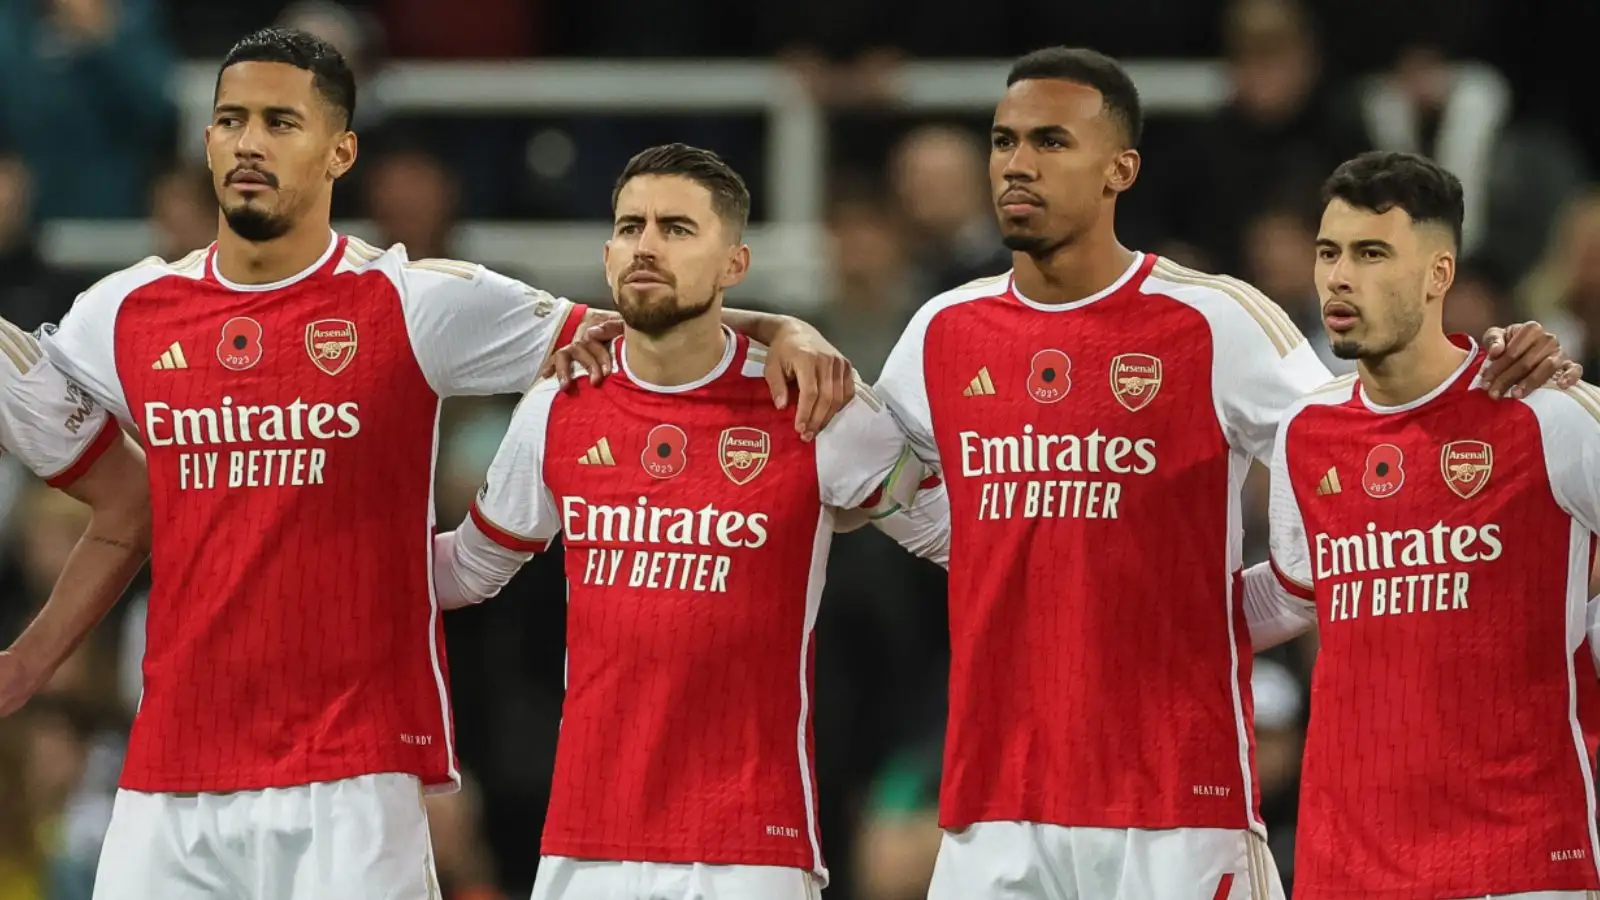 Arsenal a great team? They are flat-track bullies who ‘park the bus’ v elite